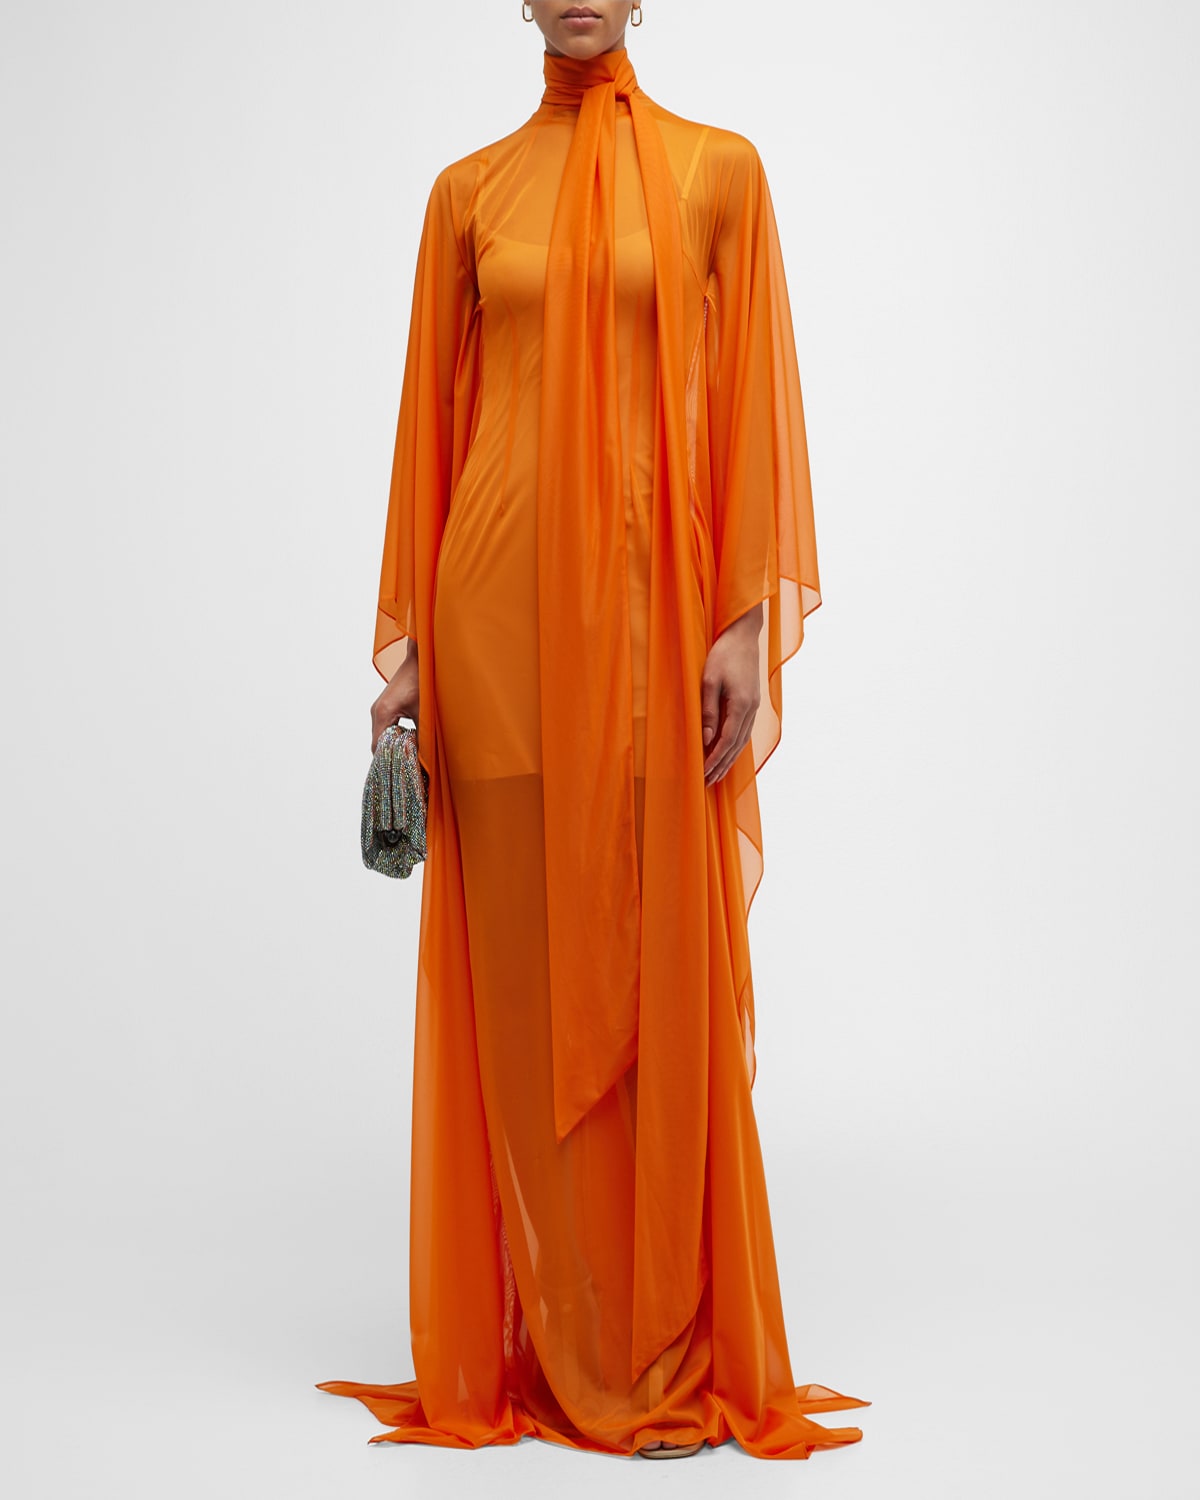 LAQUAN SMITH SHEER TIE-NECK GOWN WITH SWEEPING DOLMAN SLEEVES